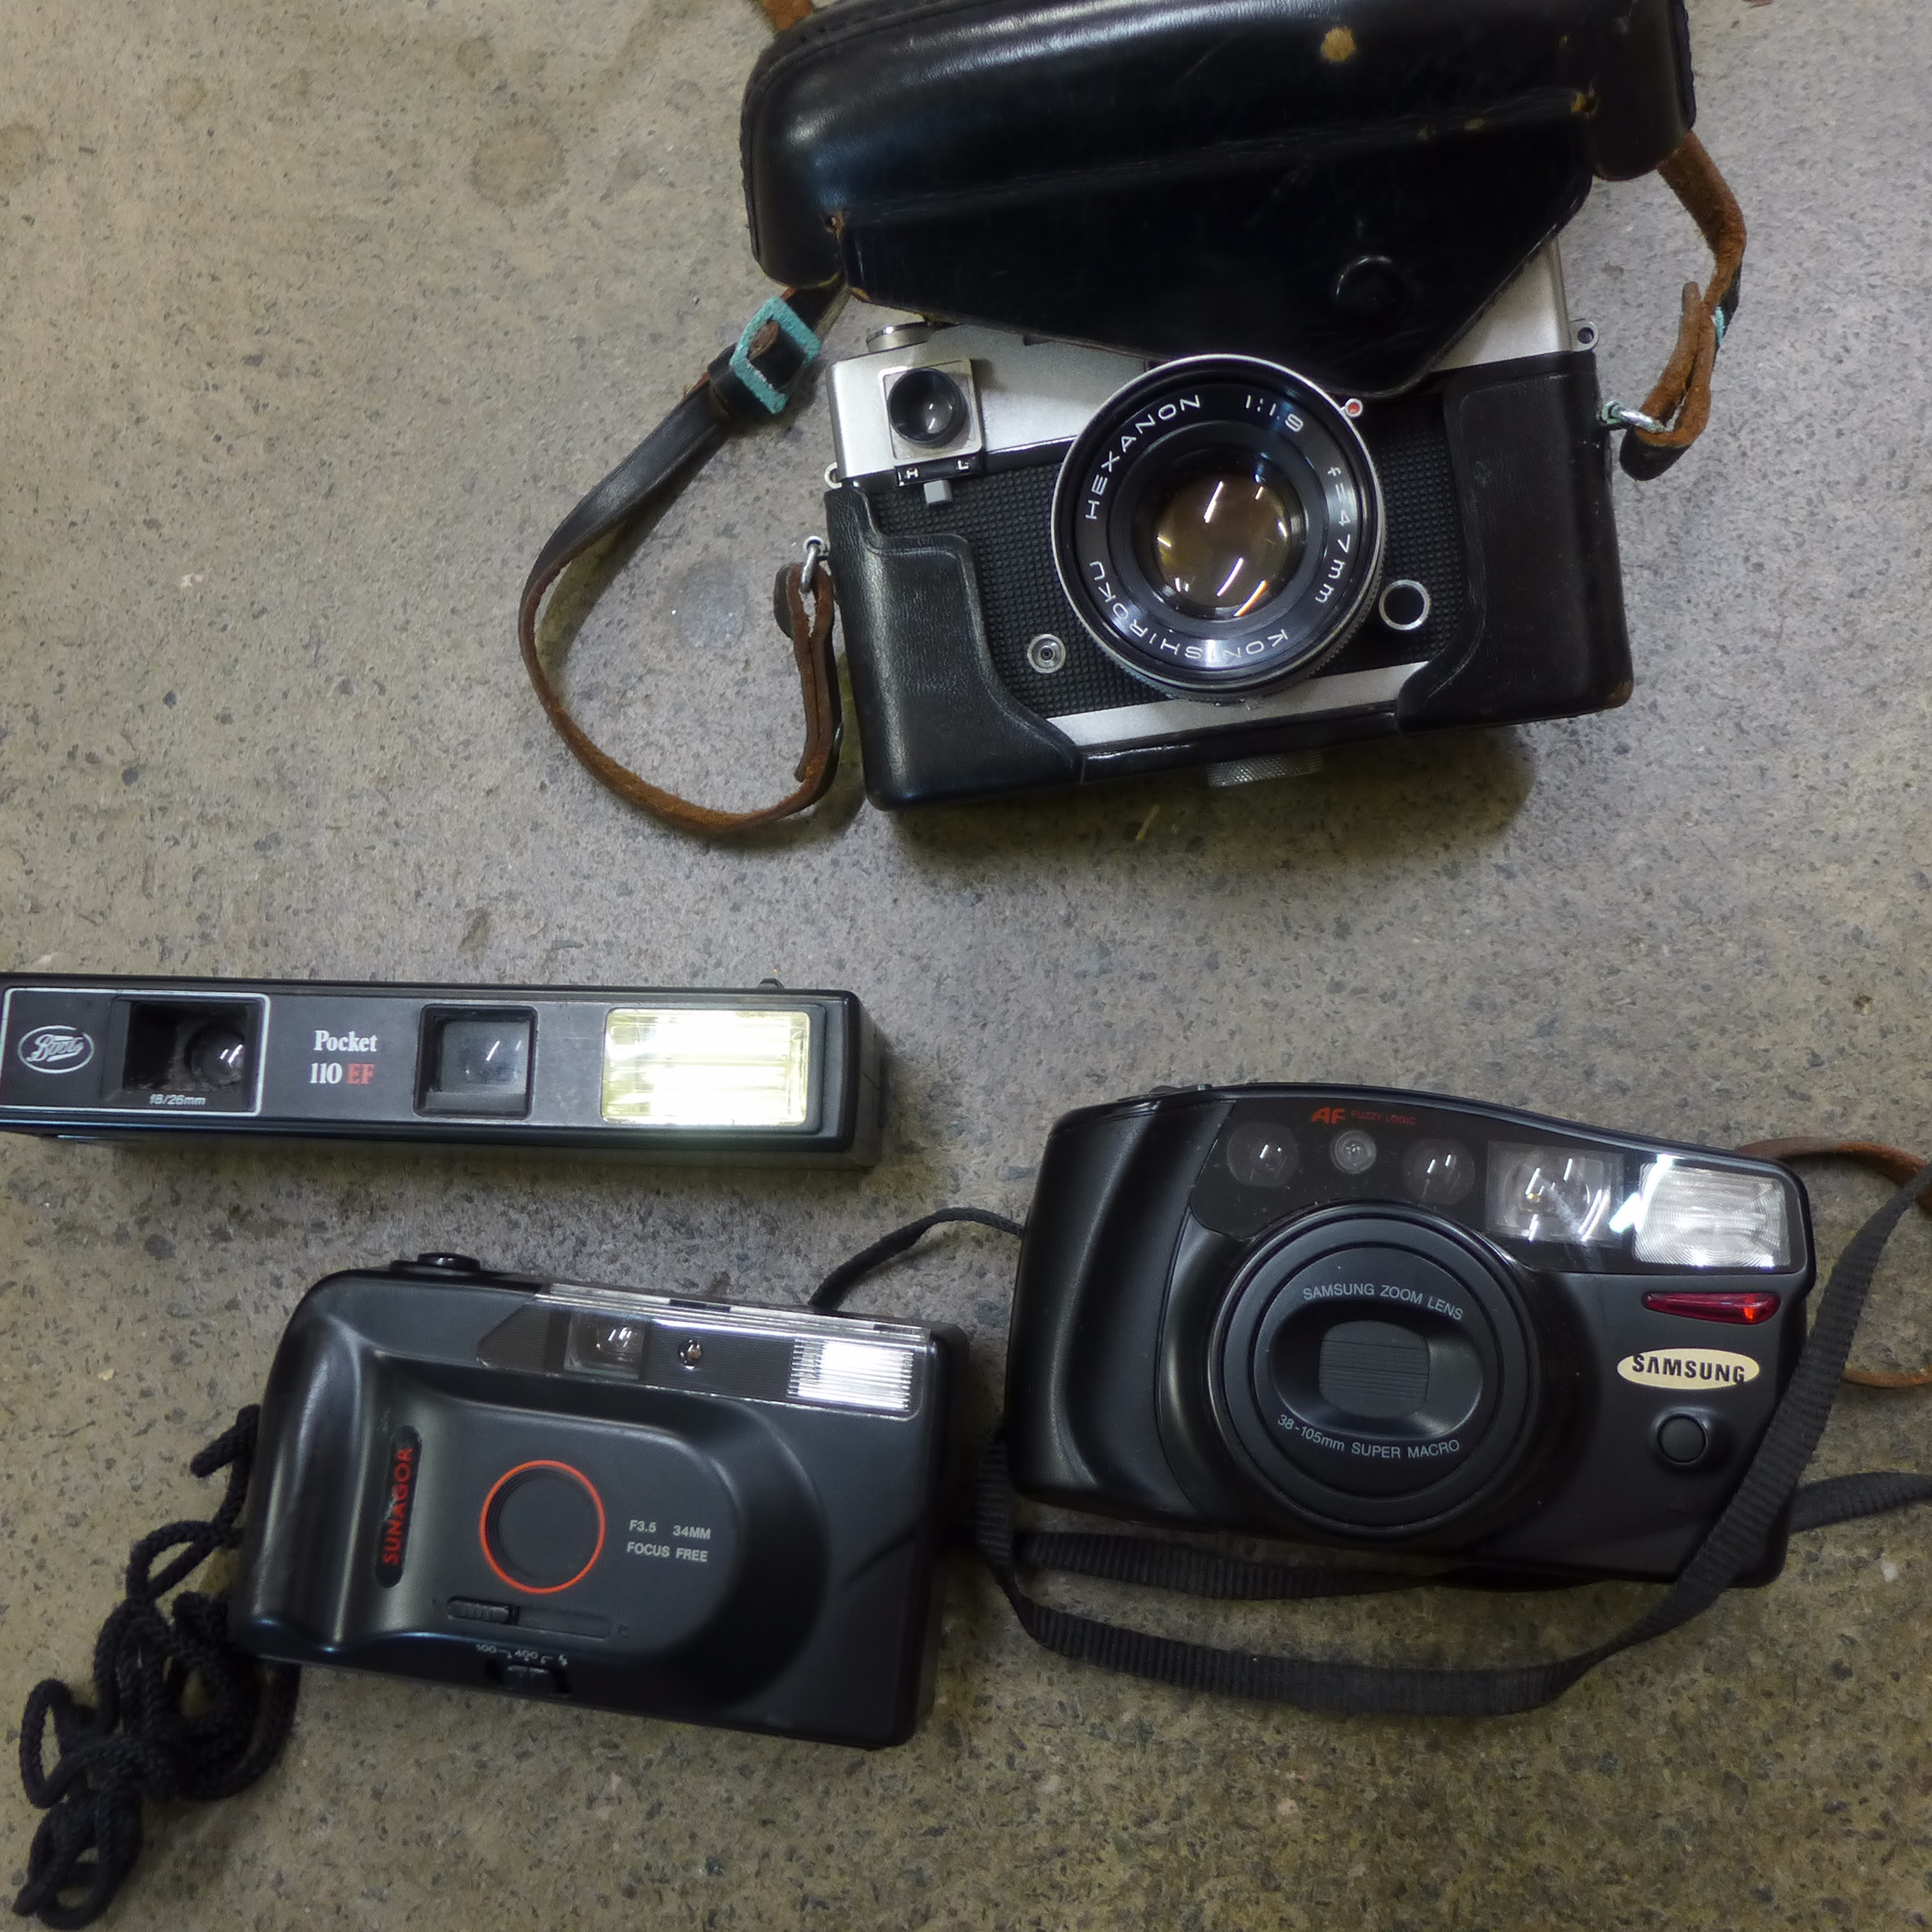 Vintage cameras; Kodak, Konica, etc., and some accessories - Image 2 of 2